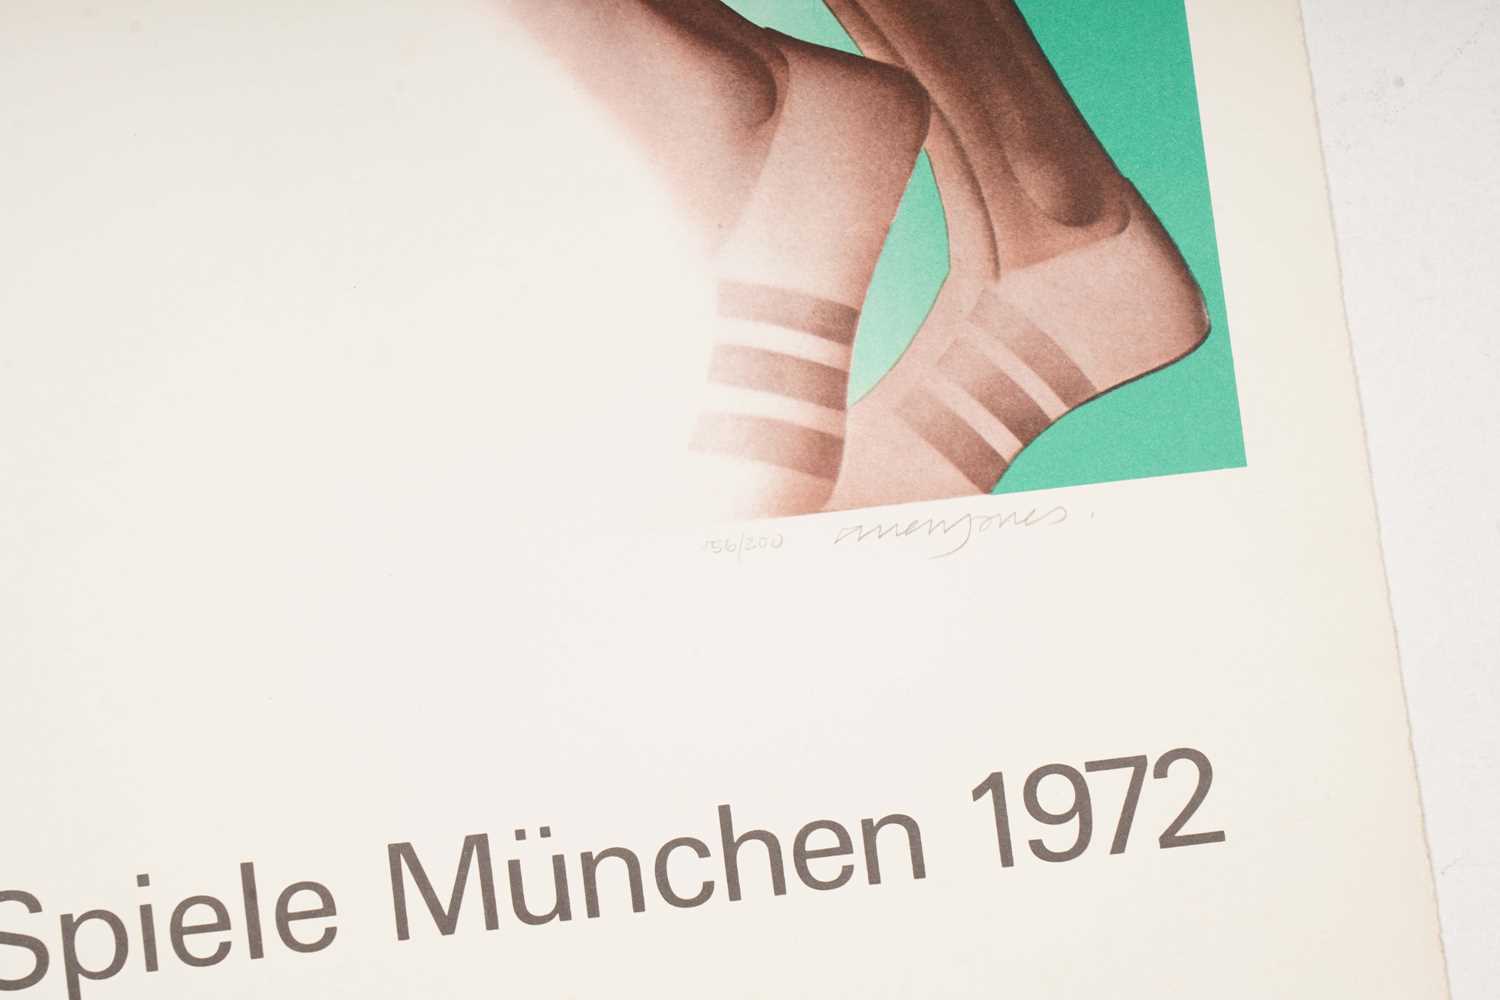 Allen Jones RA - Olympic Games Munich 1972 poster | signed limited edition serigraph - Image 3 of 3